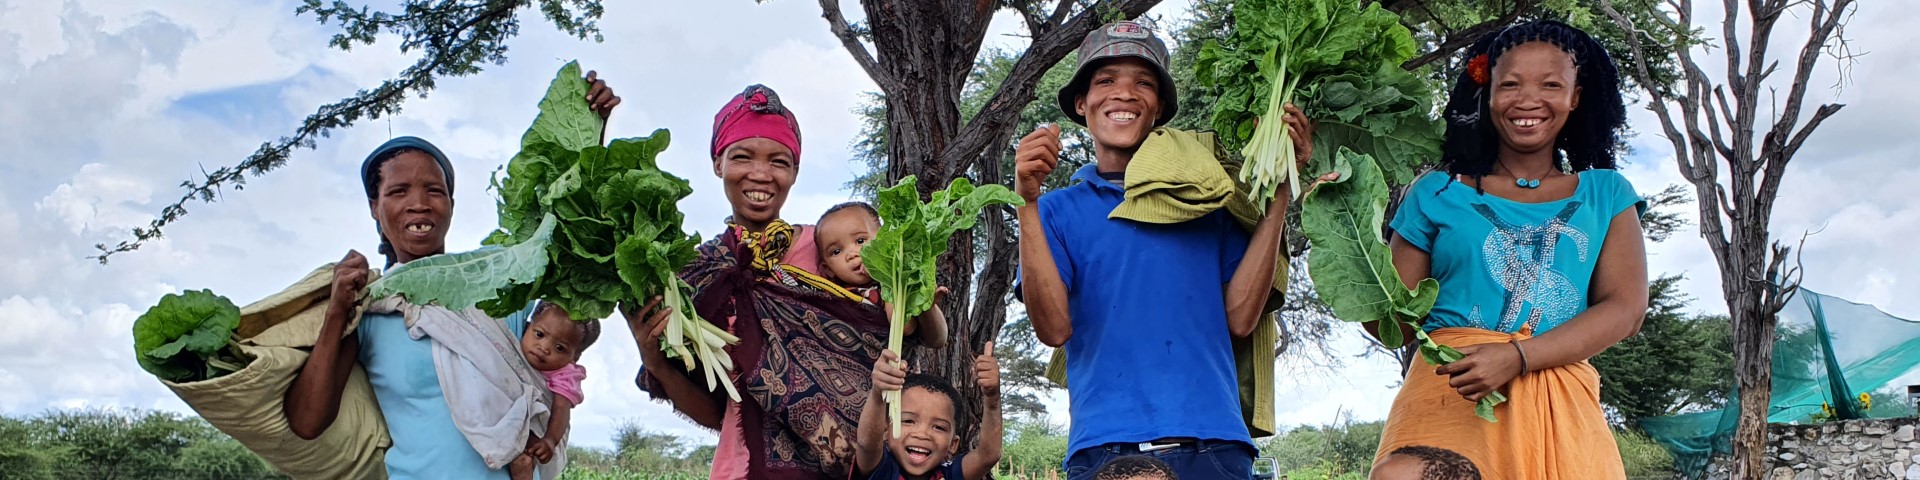 Four farmers stand with their children and their harvest in their communal field